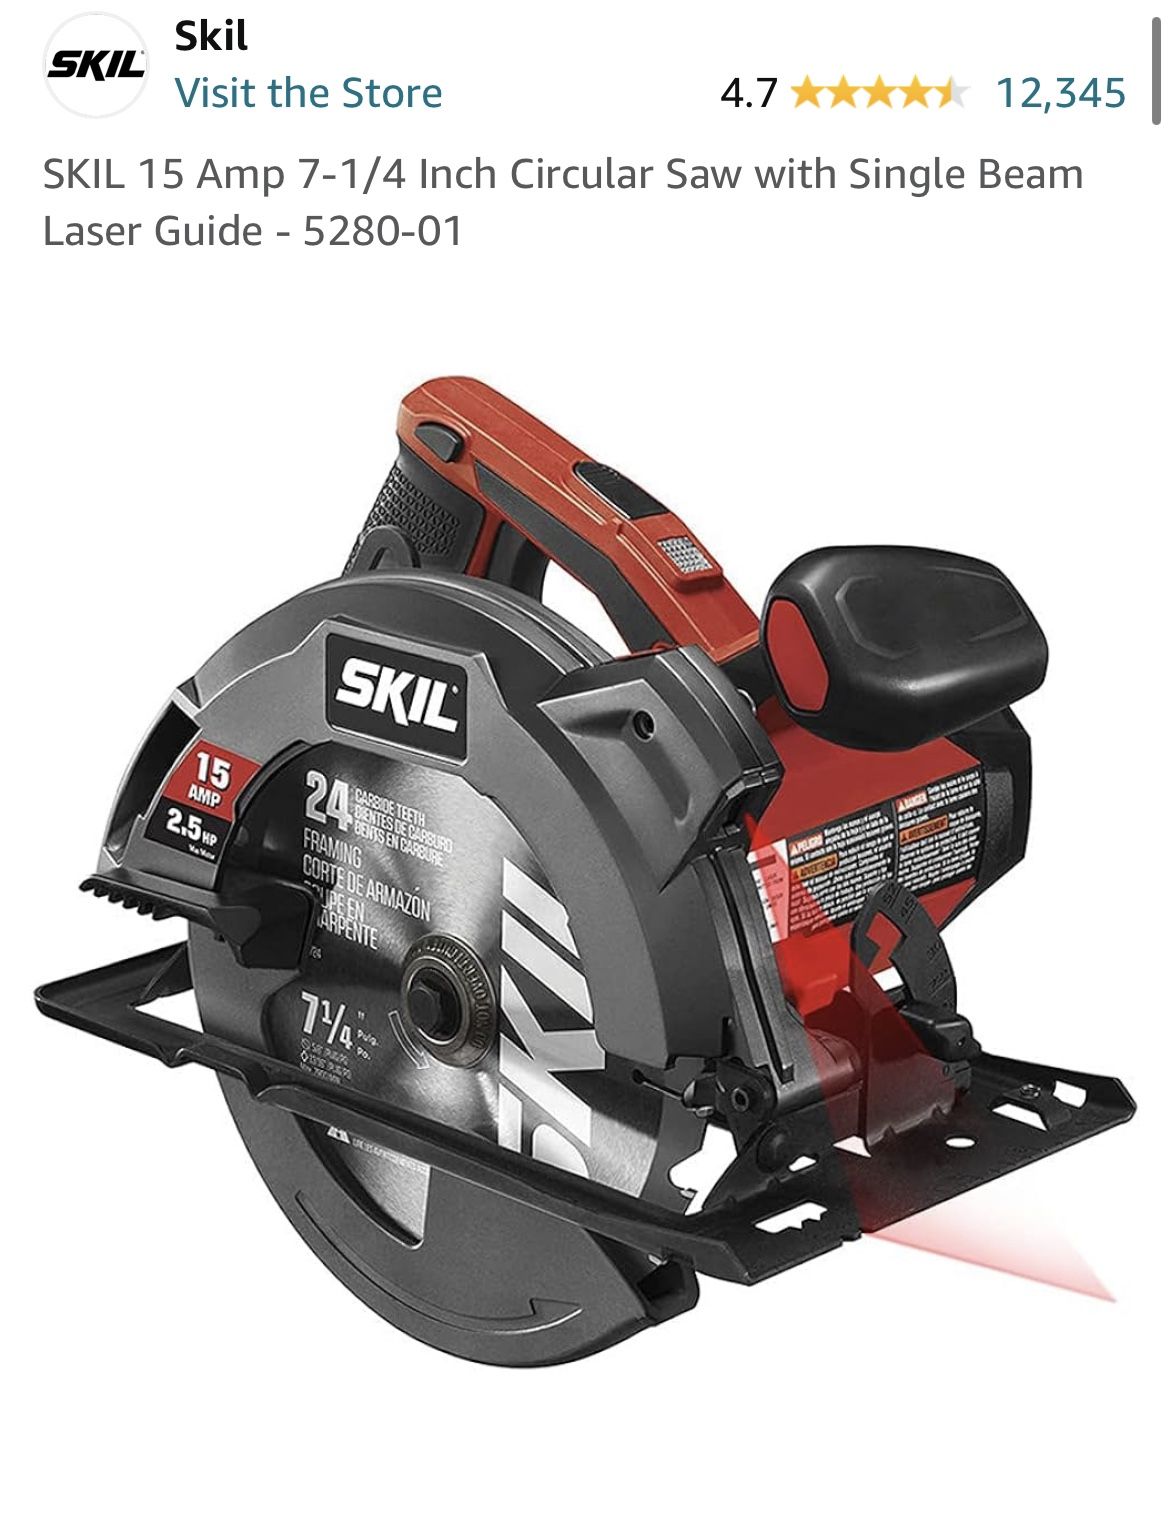 SKIL 15 Amp 7-1/4 Inch Circular Saw with Single Beam Laser Guide - 5280-01